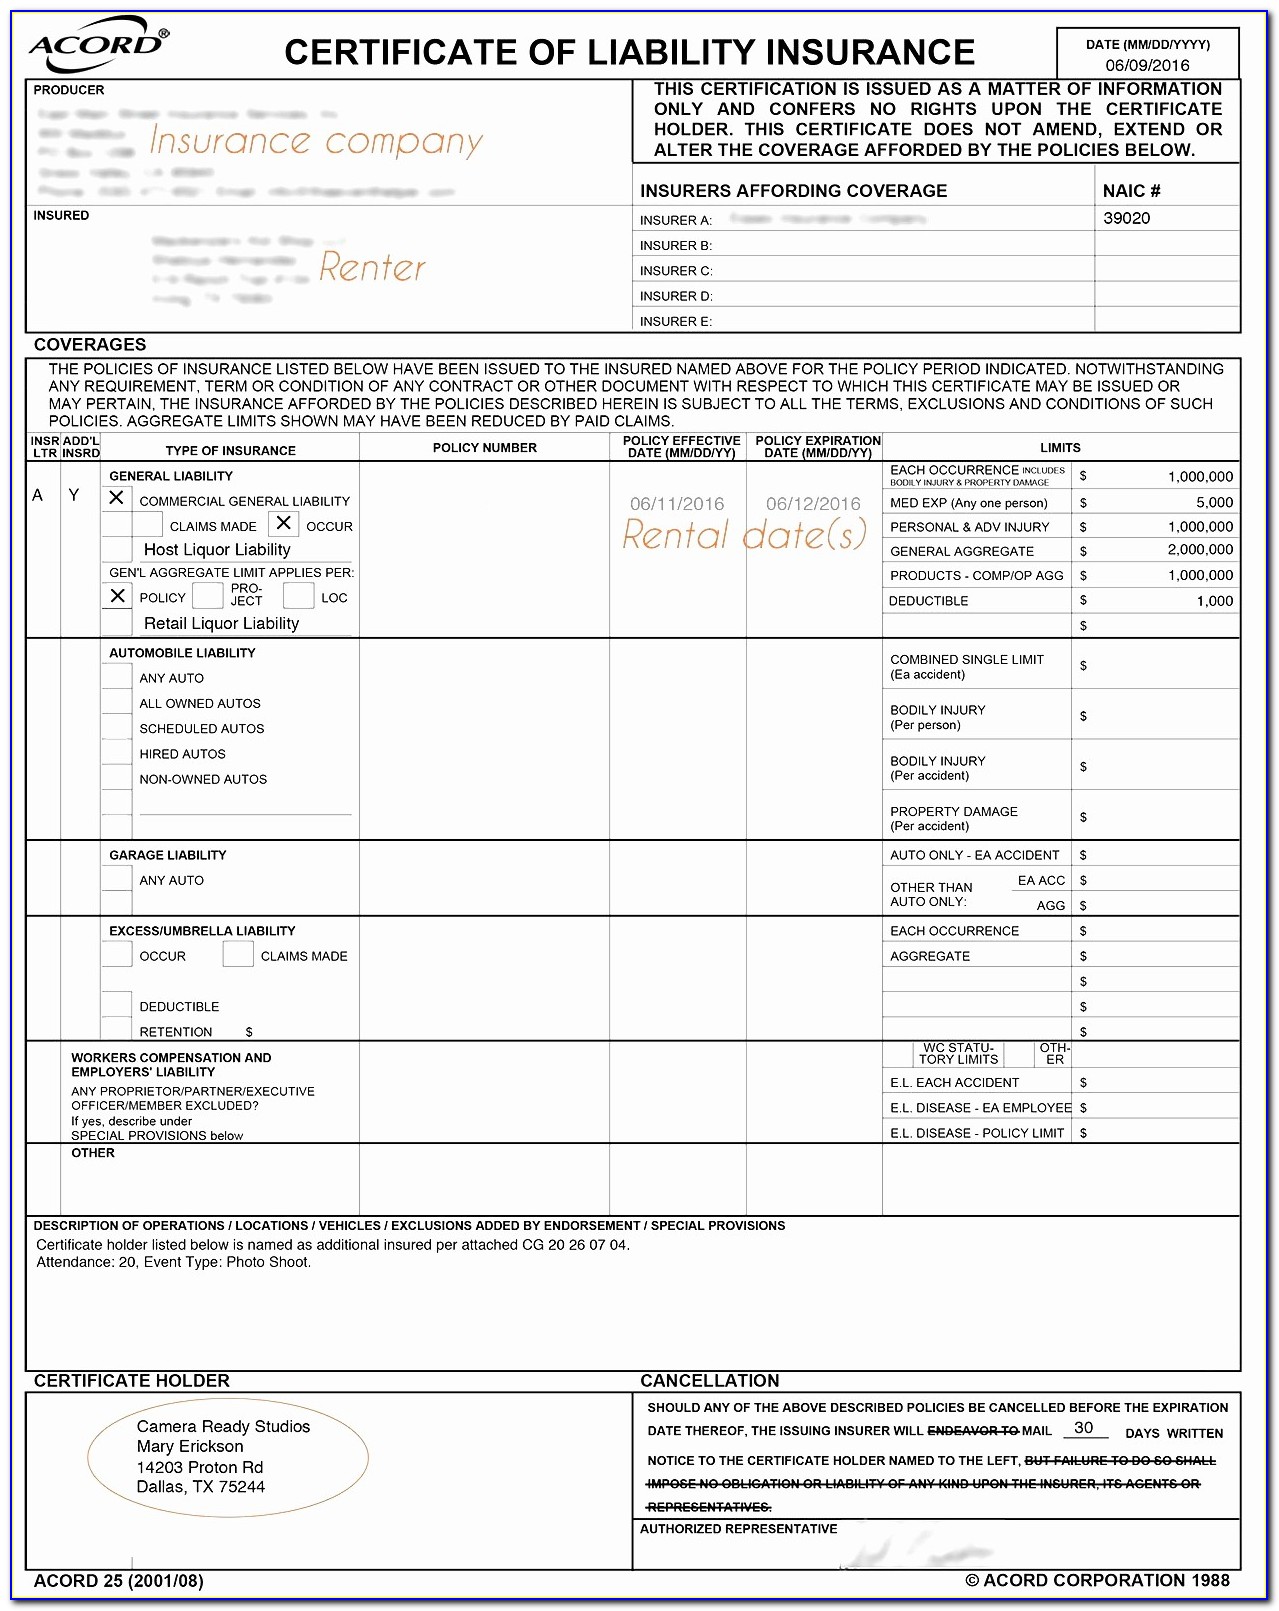 Acord Certificate Of Insurance Form 25